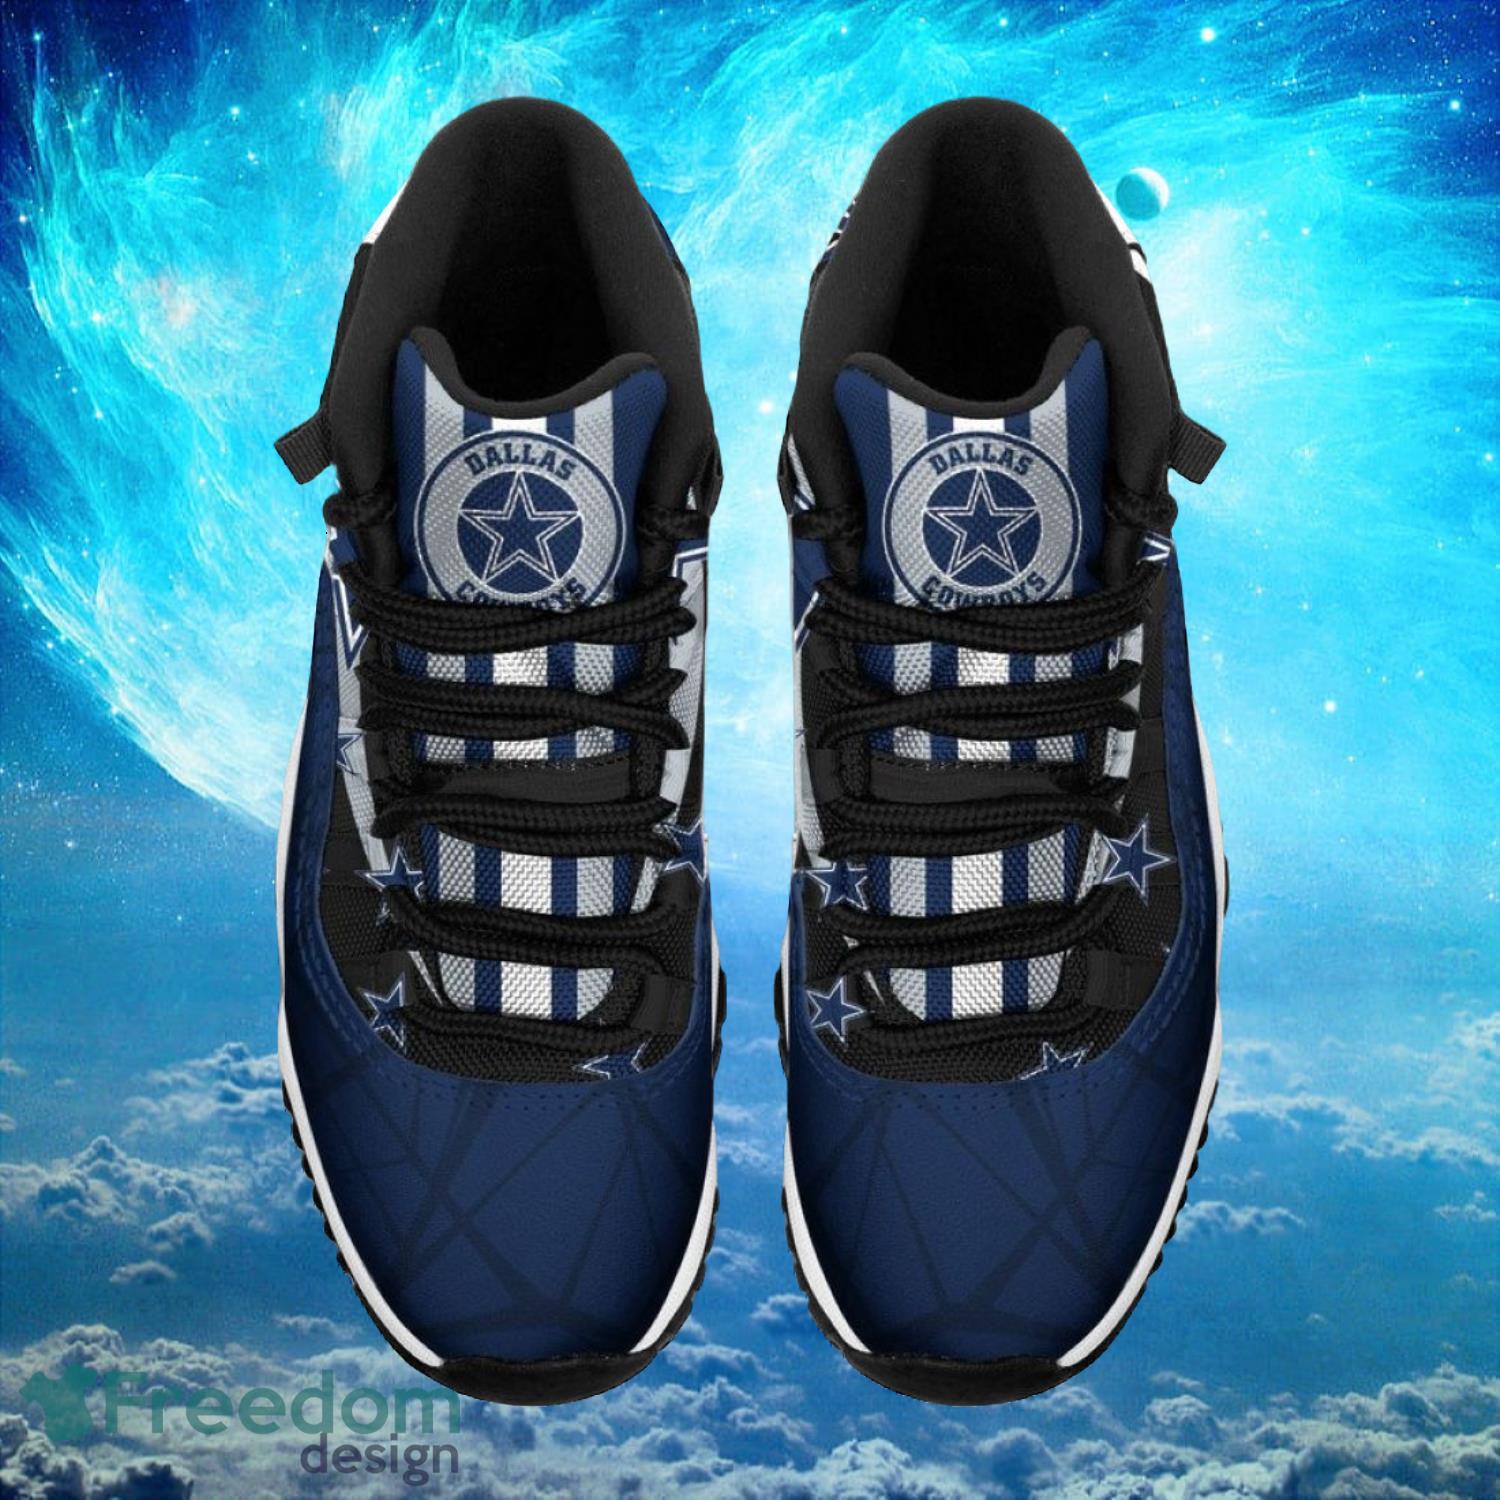 Dallas Cowboys NFL Air Jordan 11 Sneakers Shoes Gift For Fans Product Photo 2